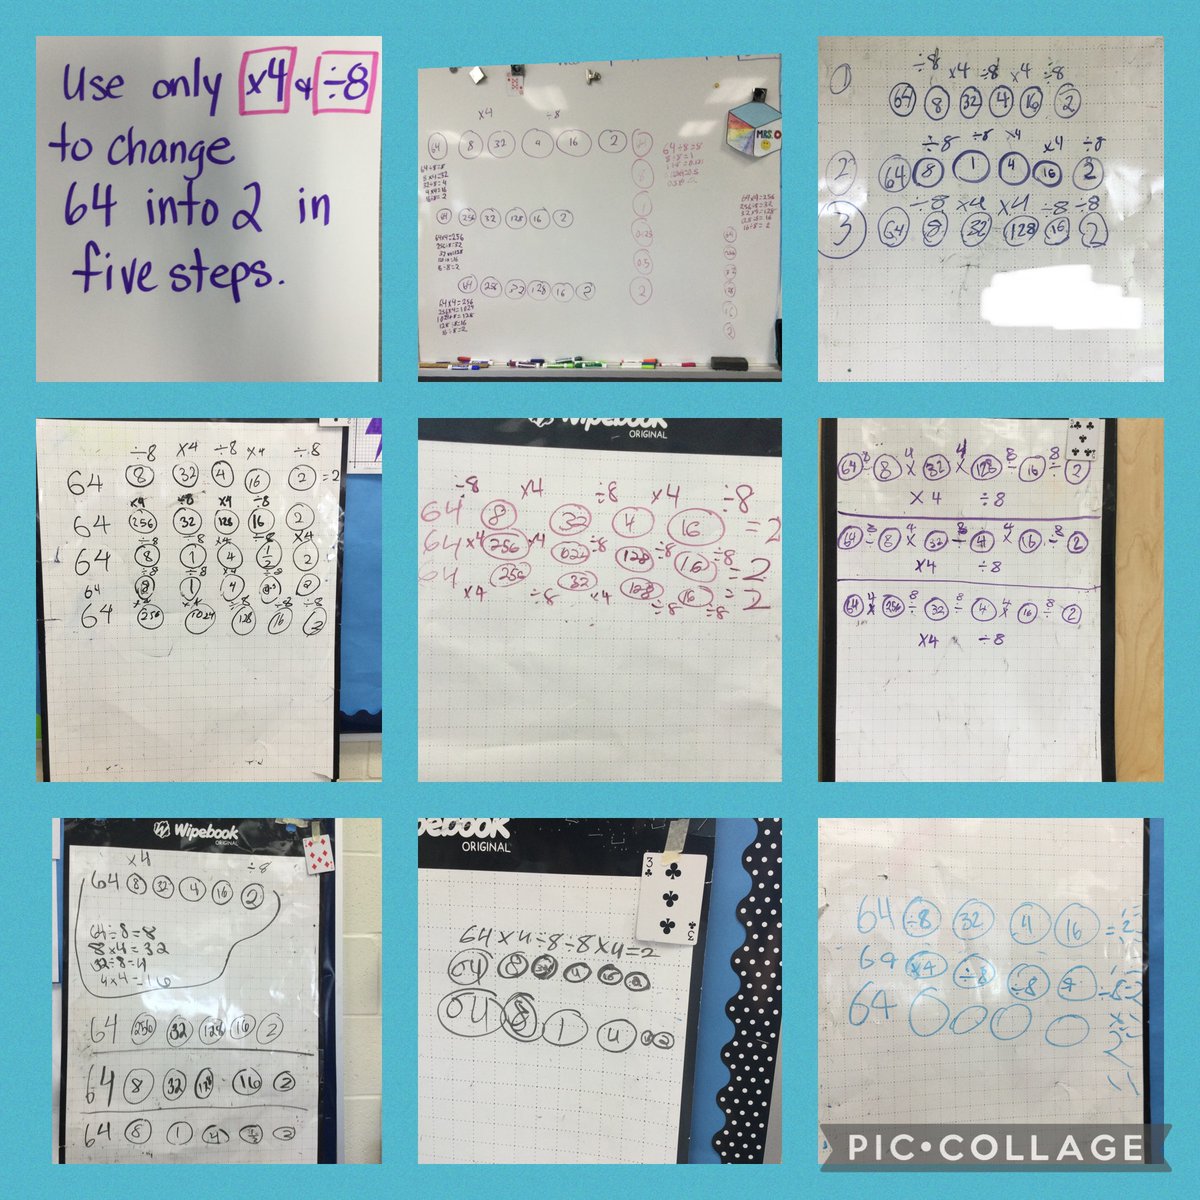 2nd day of school and we’re up at the whiteboards working in random groups. Some amazing thinking happened! @MollyBrant_LDSB 😀😀😀